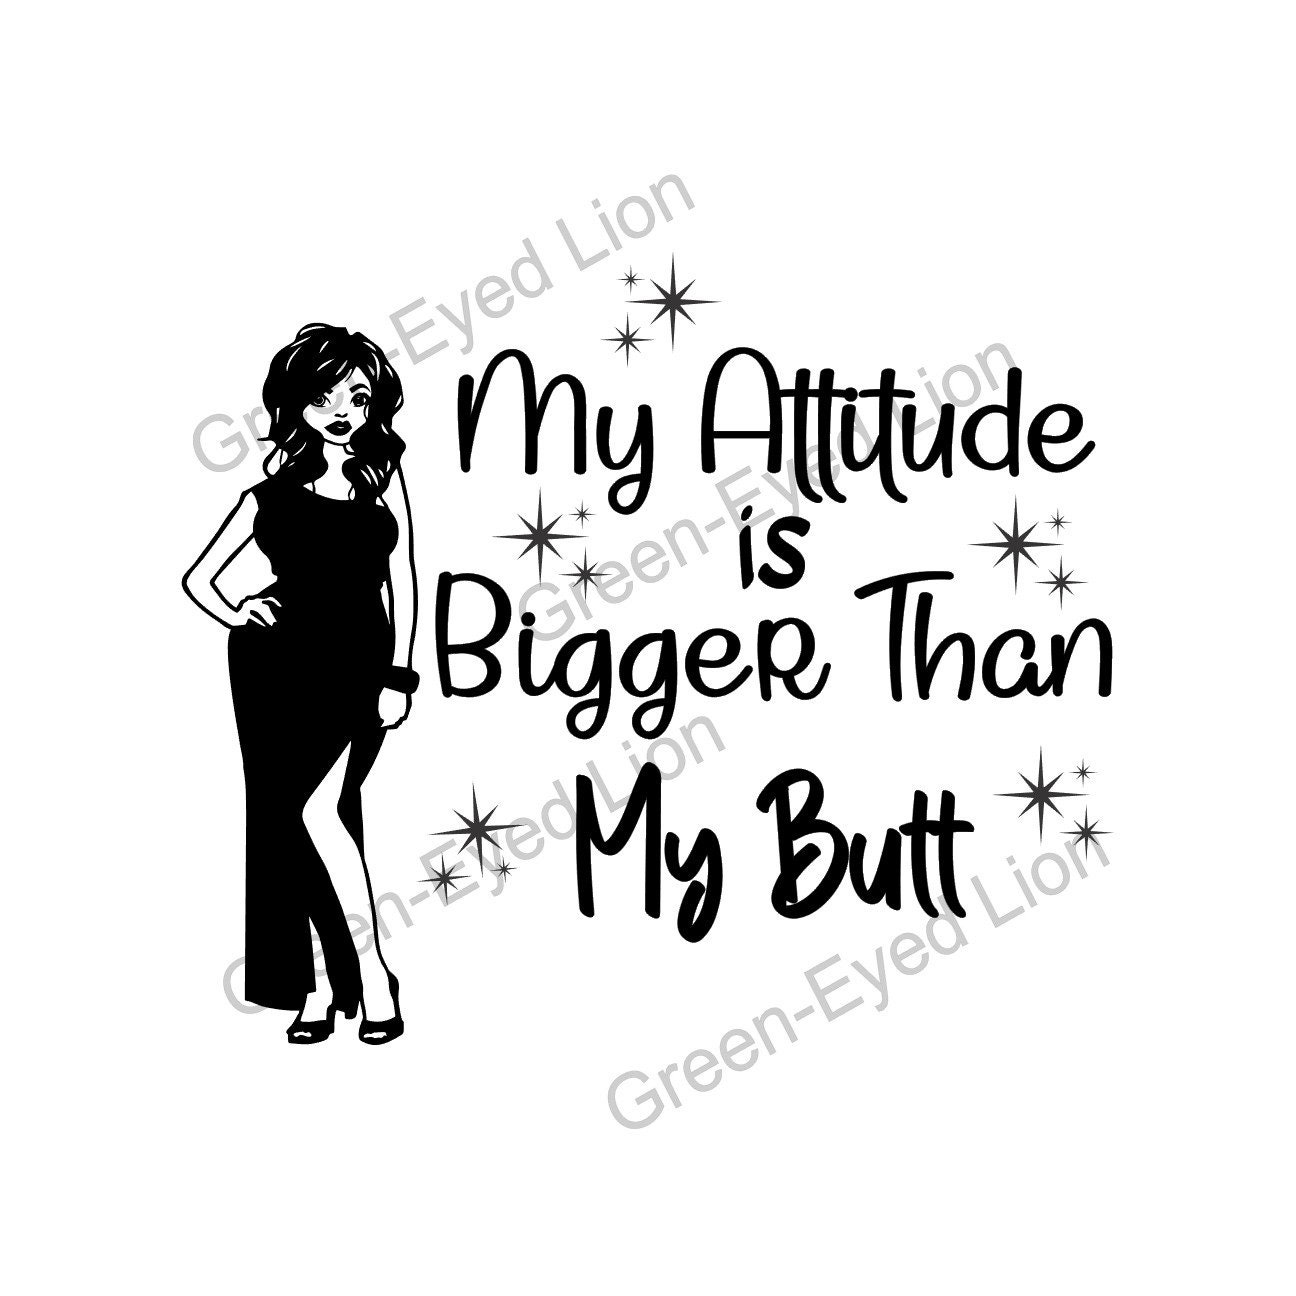 My Attitude is Bigger Than My Butt Digital Design Funny Quote - Etsy